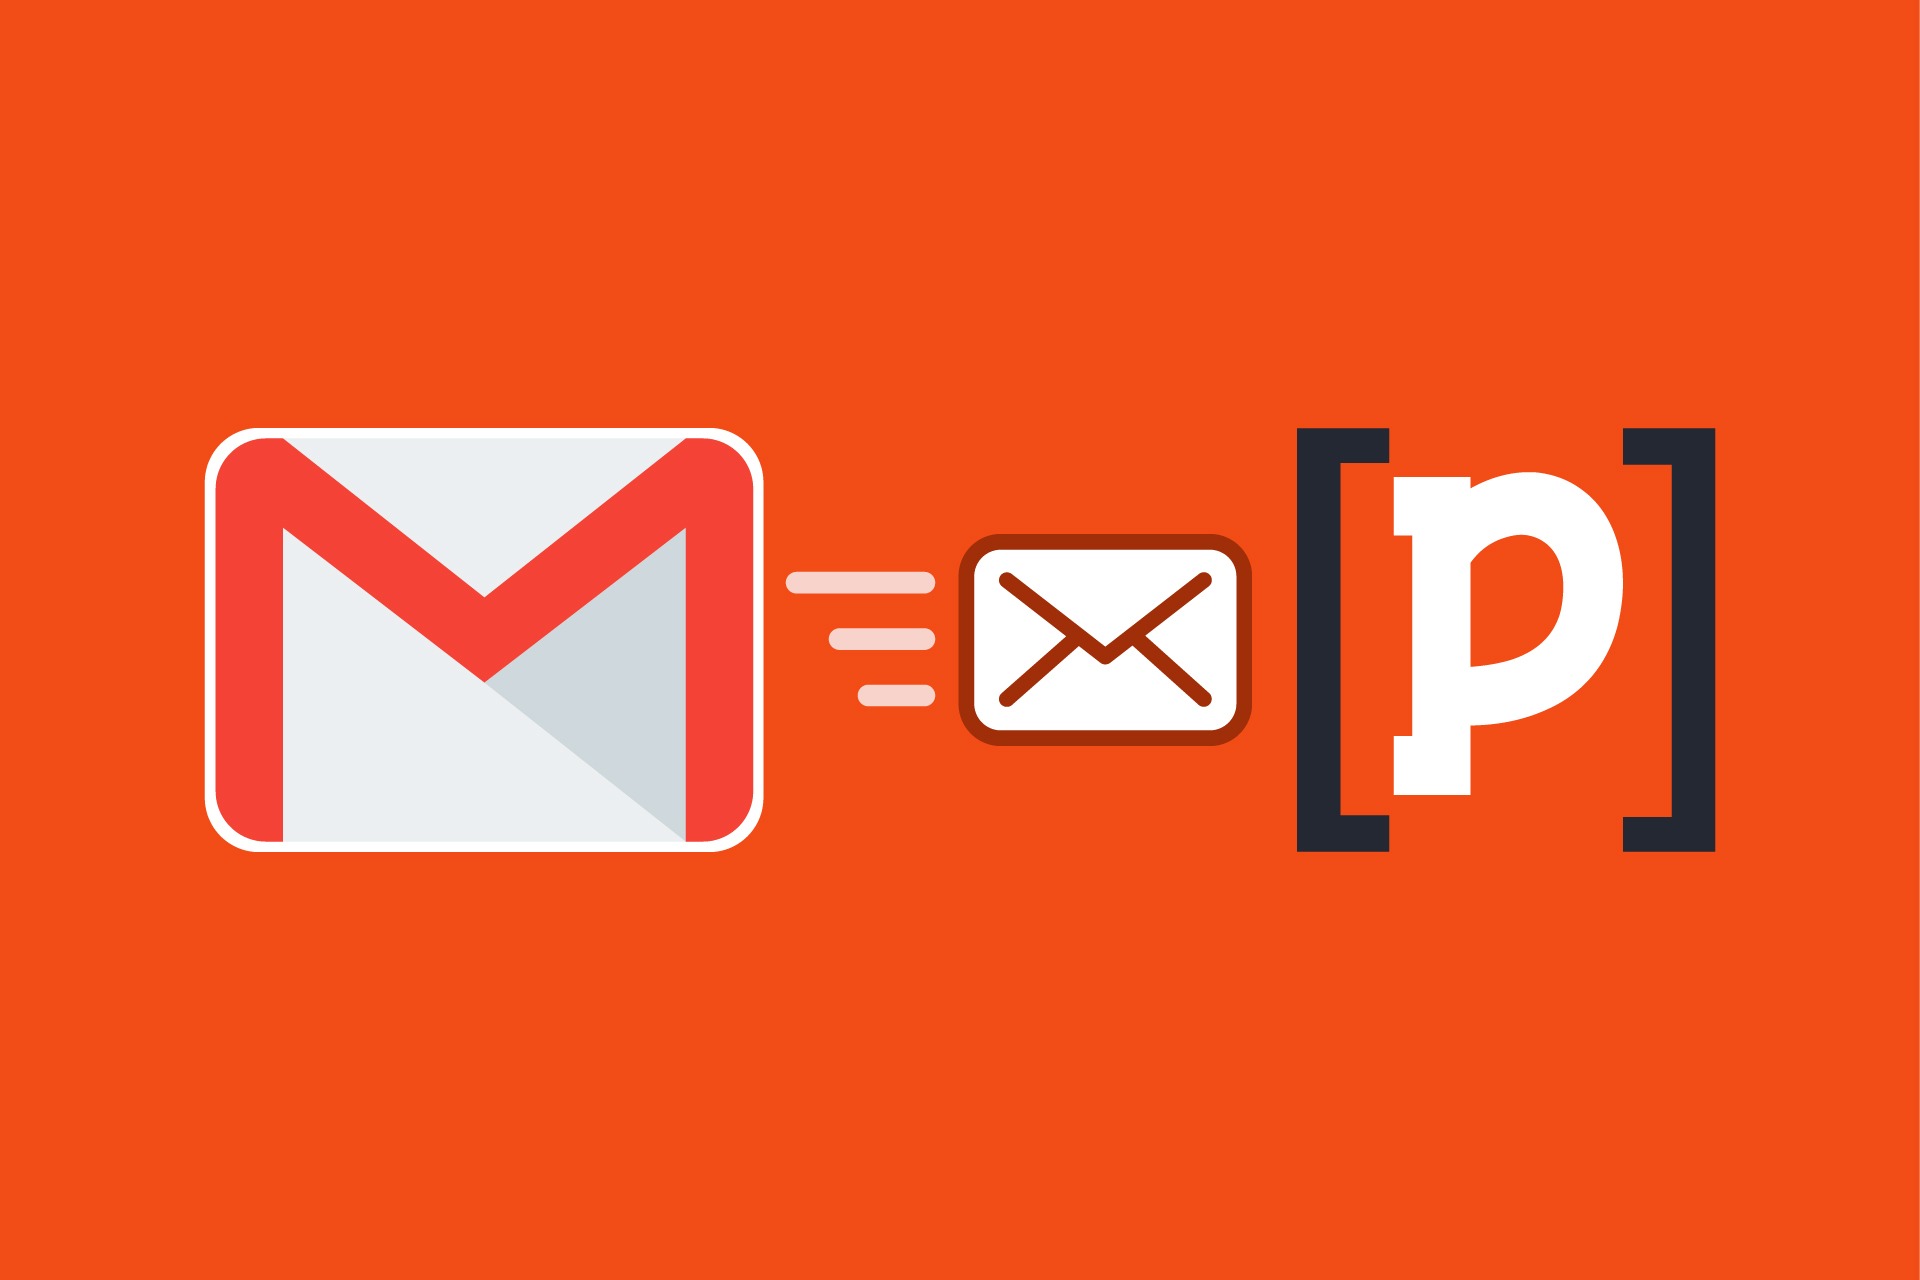 vergelijking Peer beneden 3 Easy Steps to Auto-forward Emails in Gmail (with pictures) - Parsey